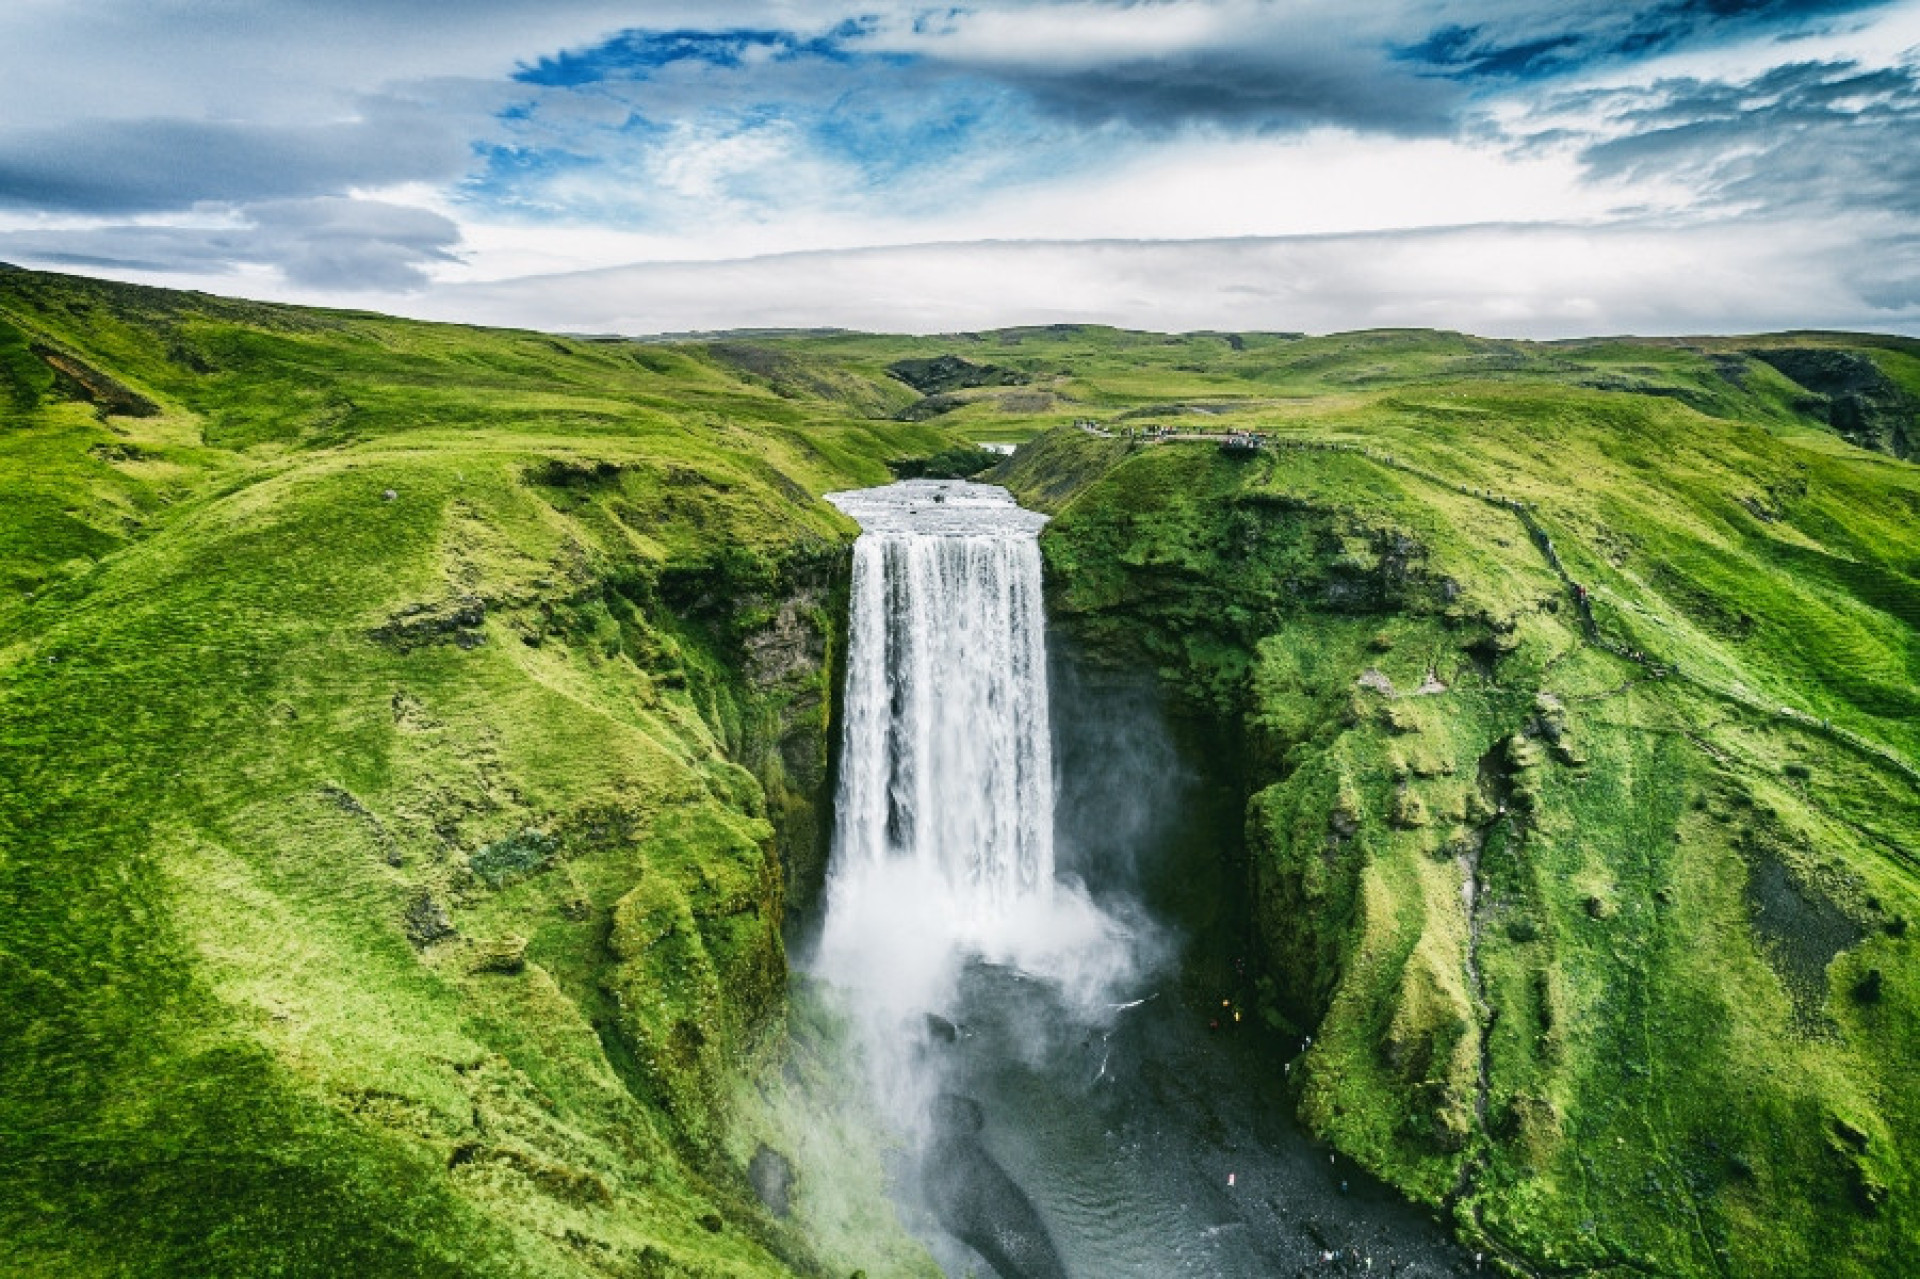 <p>The nation’s robust healthcare system, clean environment, and comprehensive welfare systems are pivotal in earning Iceland this ranking.</p><p>You may also like:<a href="https://www.starsinsider.com/n/387641?utm_source=msn.com&utm_medium=display&utm_campaign=referral_description&utm_content=582401en-en"> Otherworldly encounters: Celebrities who believe in aliens</a></p>